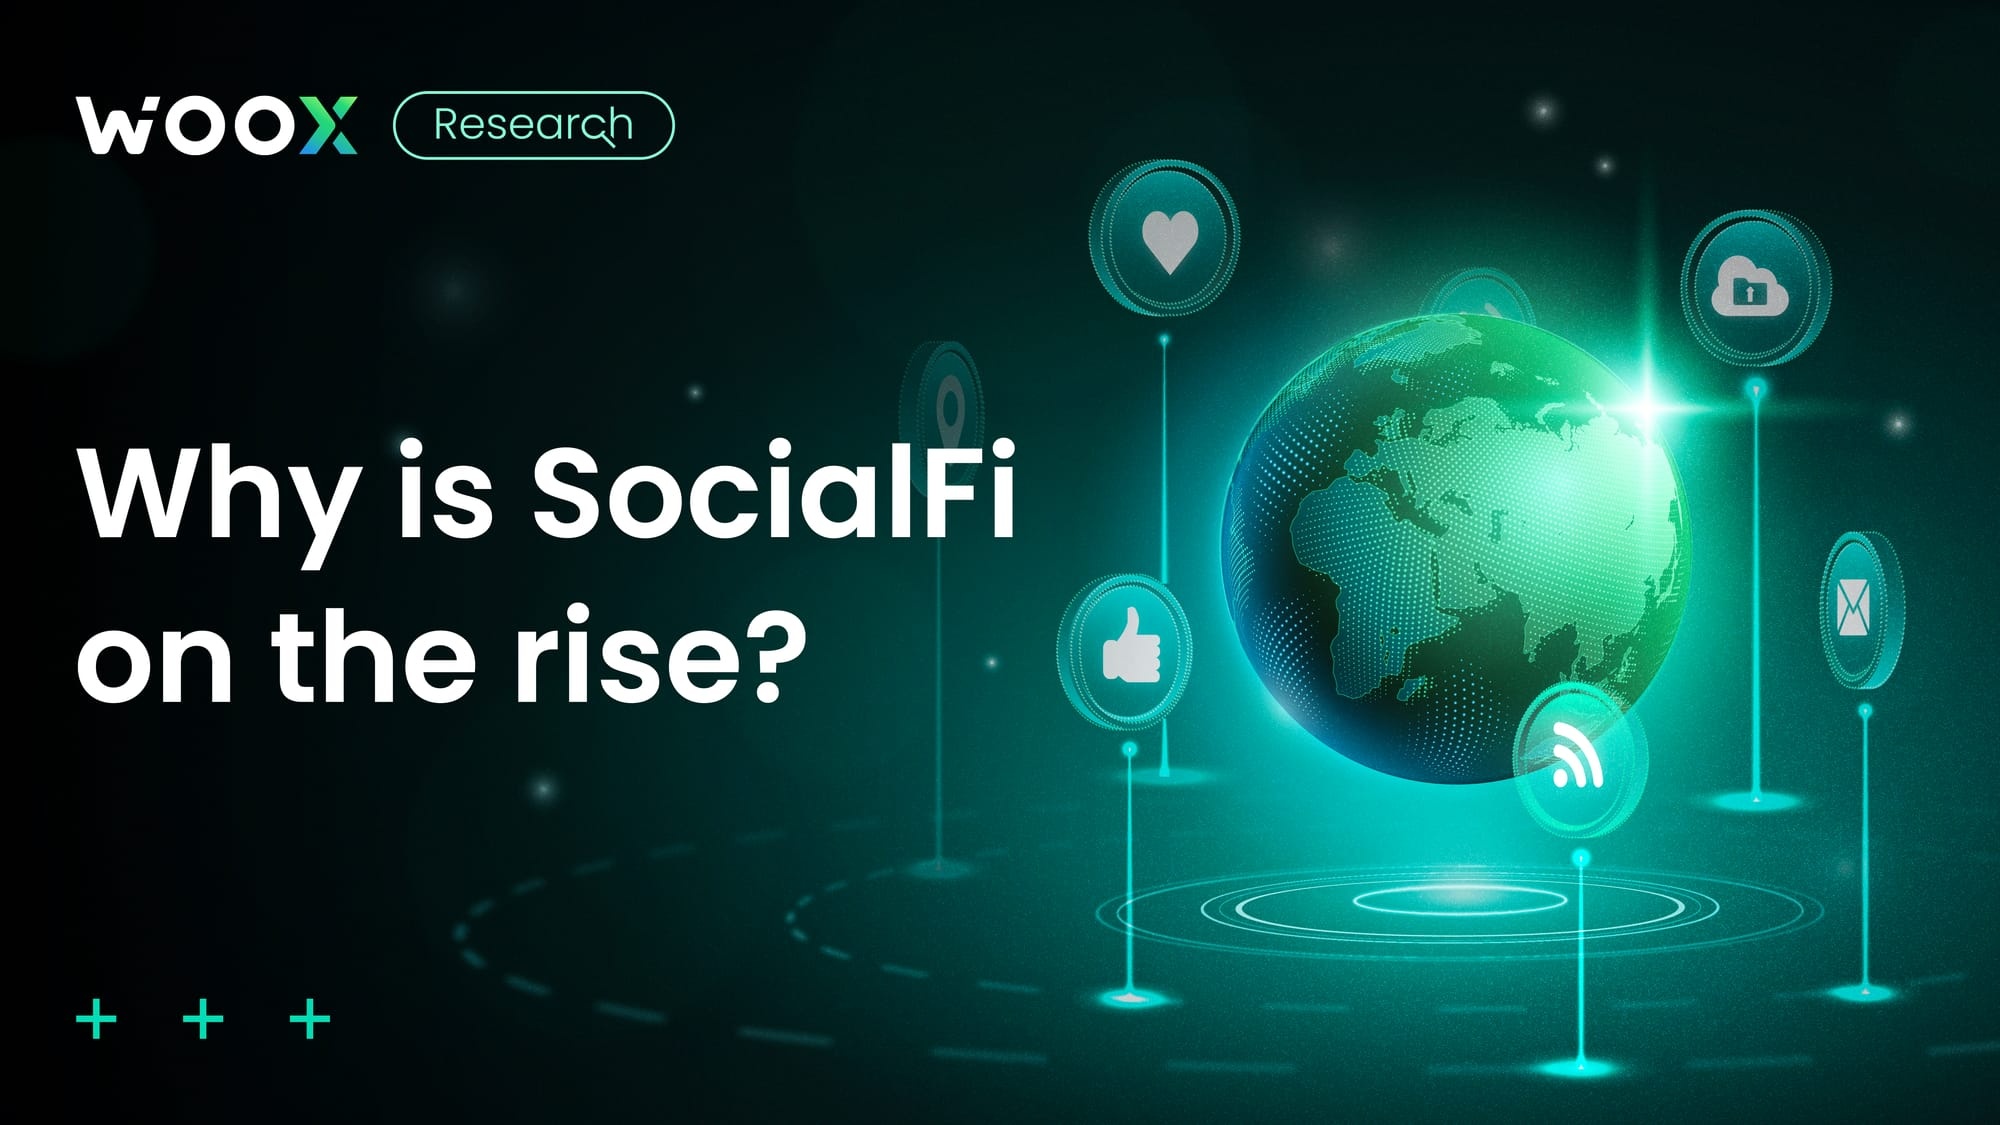 With SocialFi on the rise, which projects are traders eyeing?